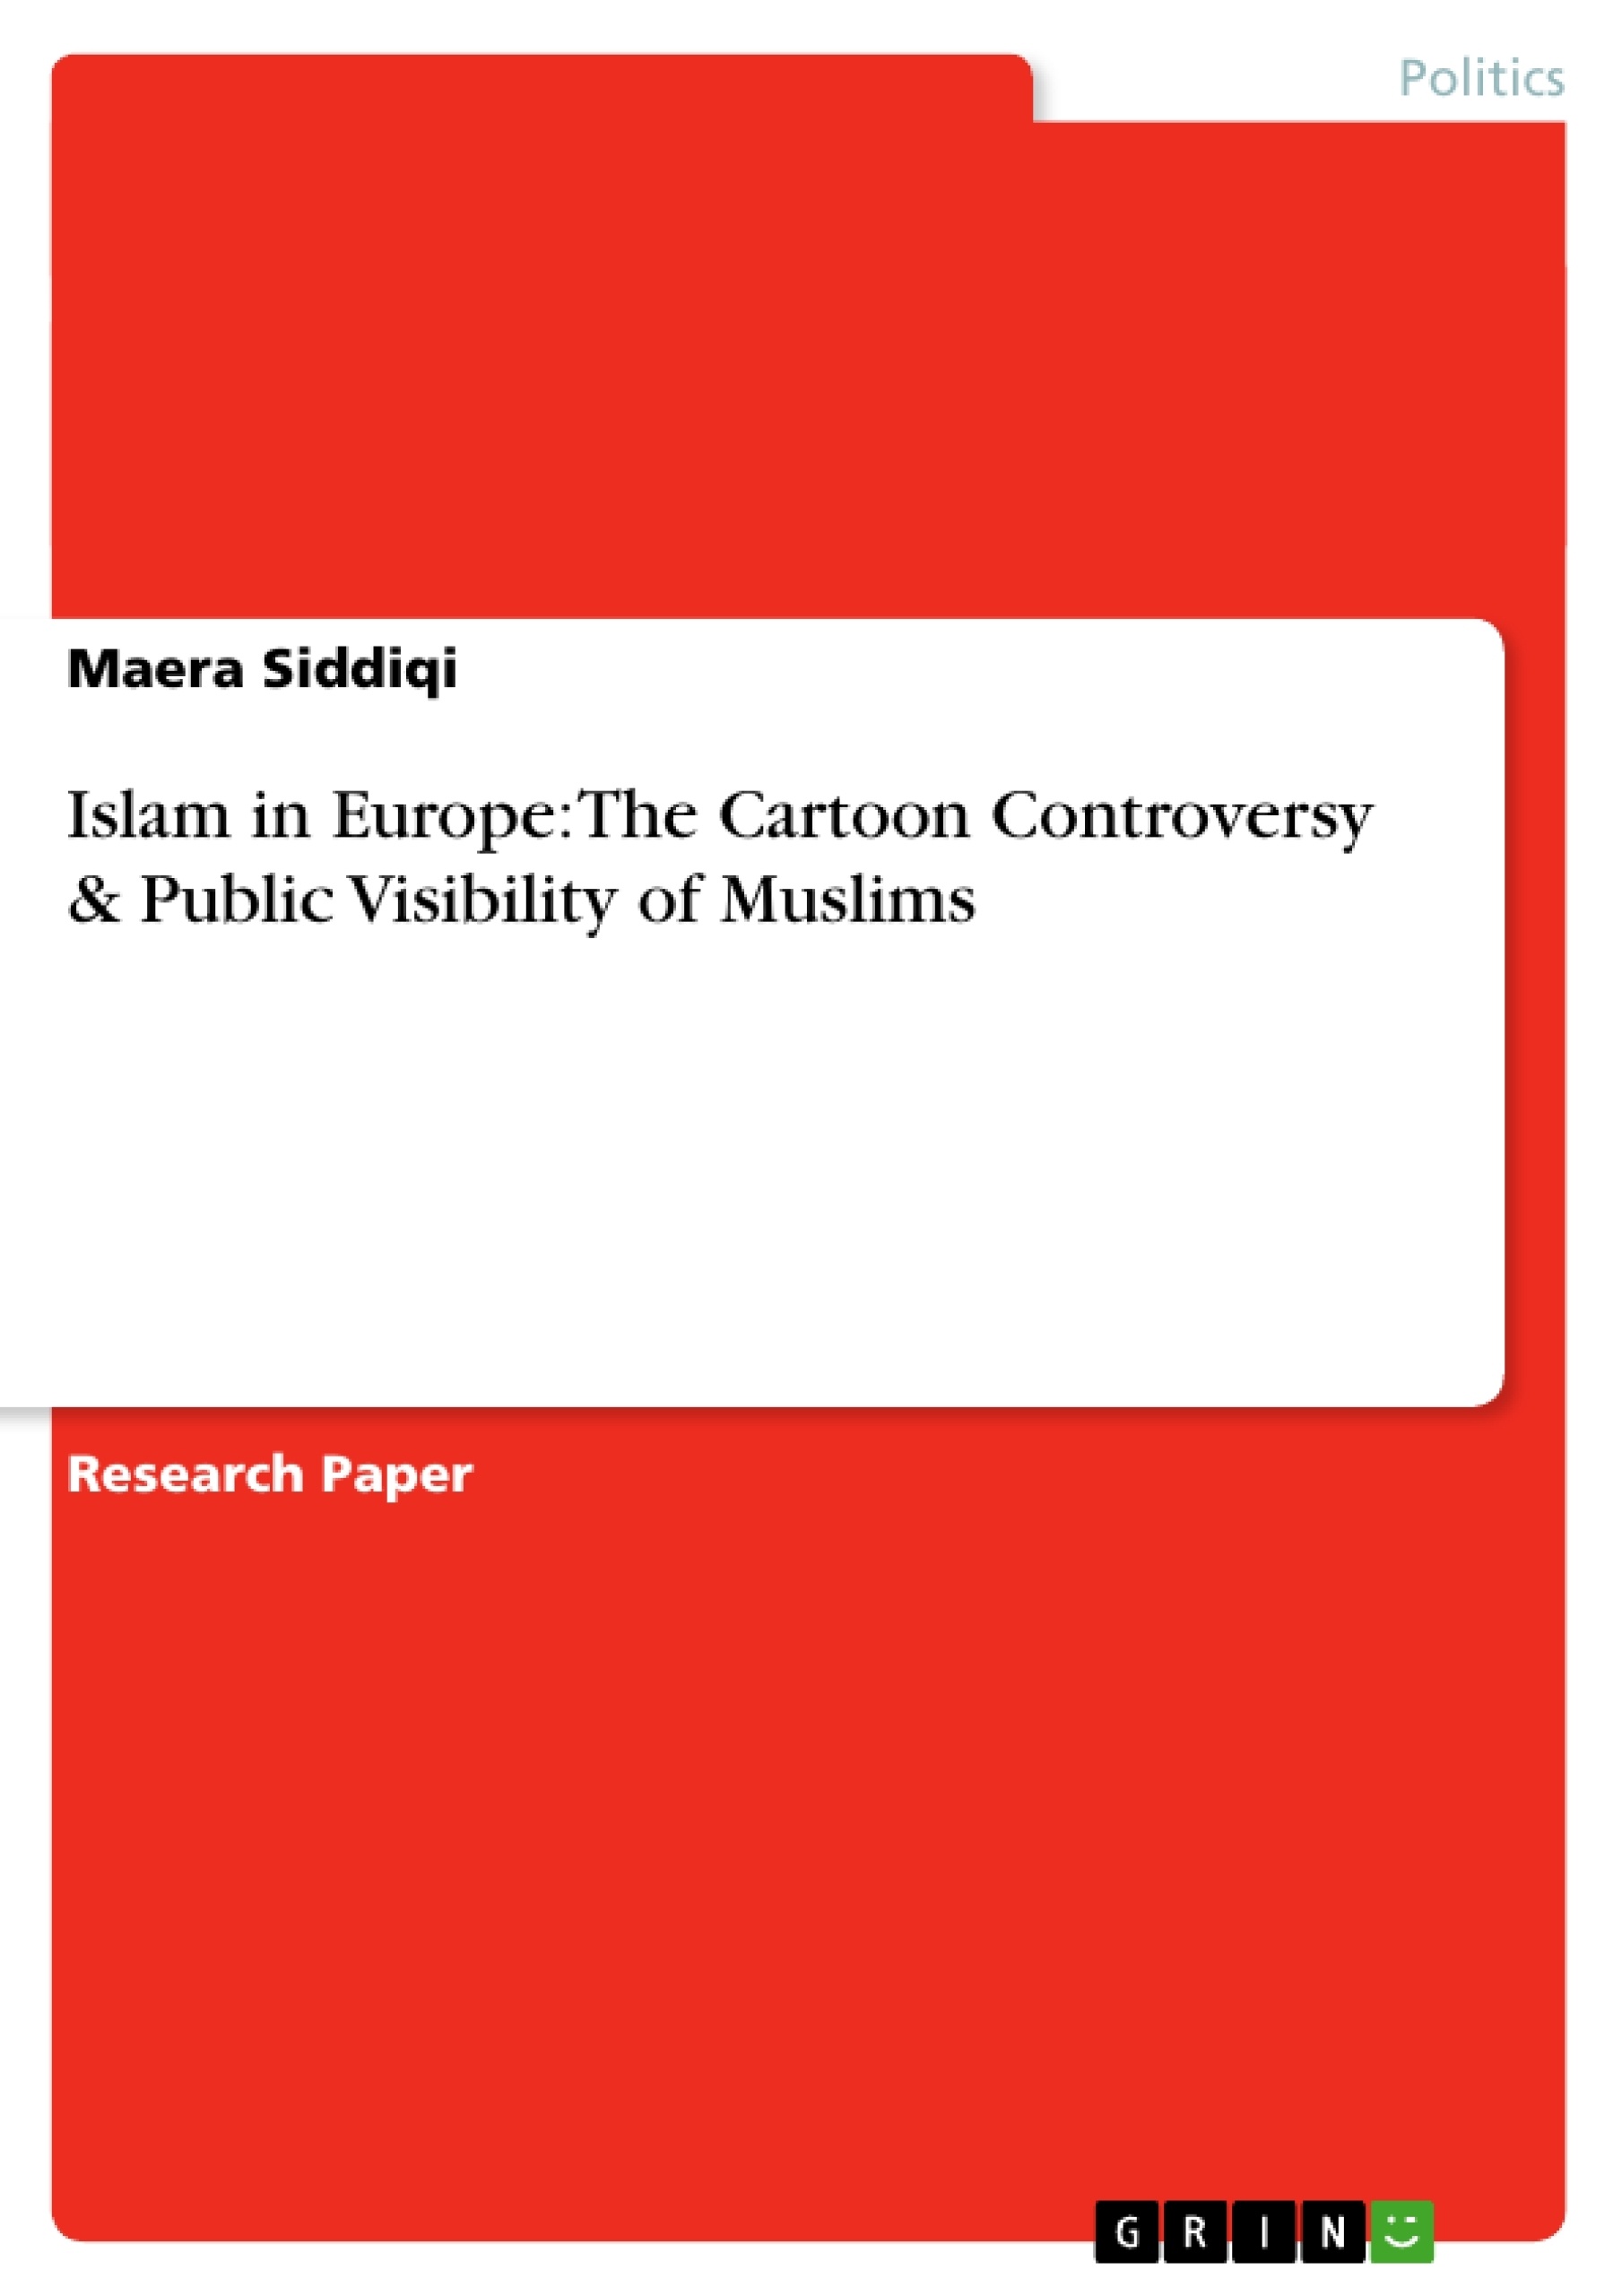 Título: Islam in Europe: The Cartoon Controversy & Public Visibility of Muslims